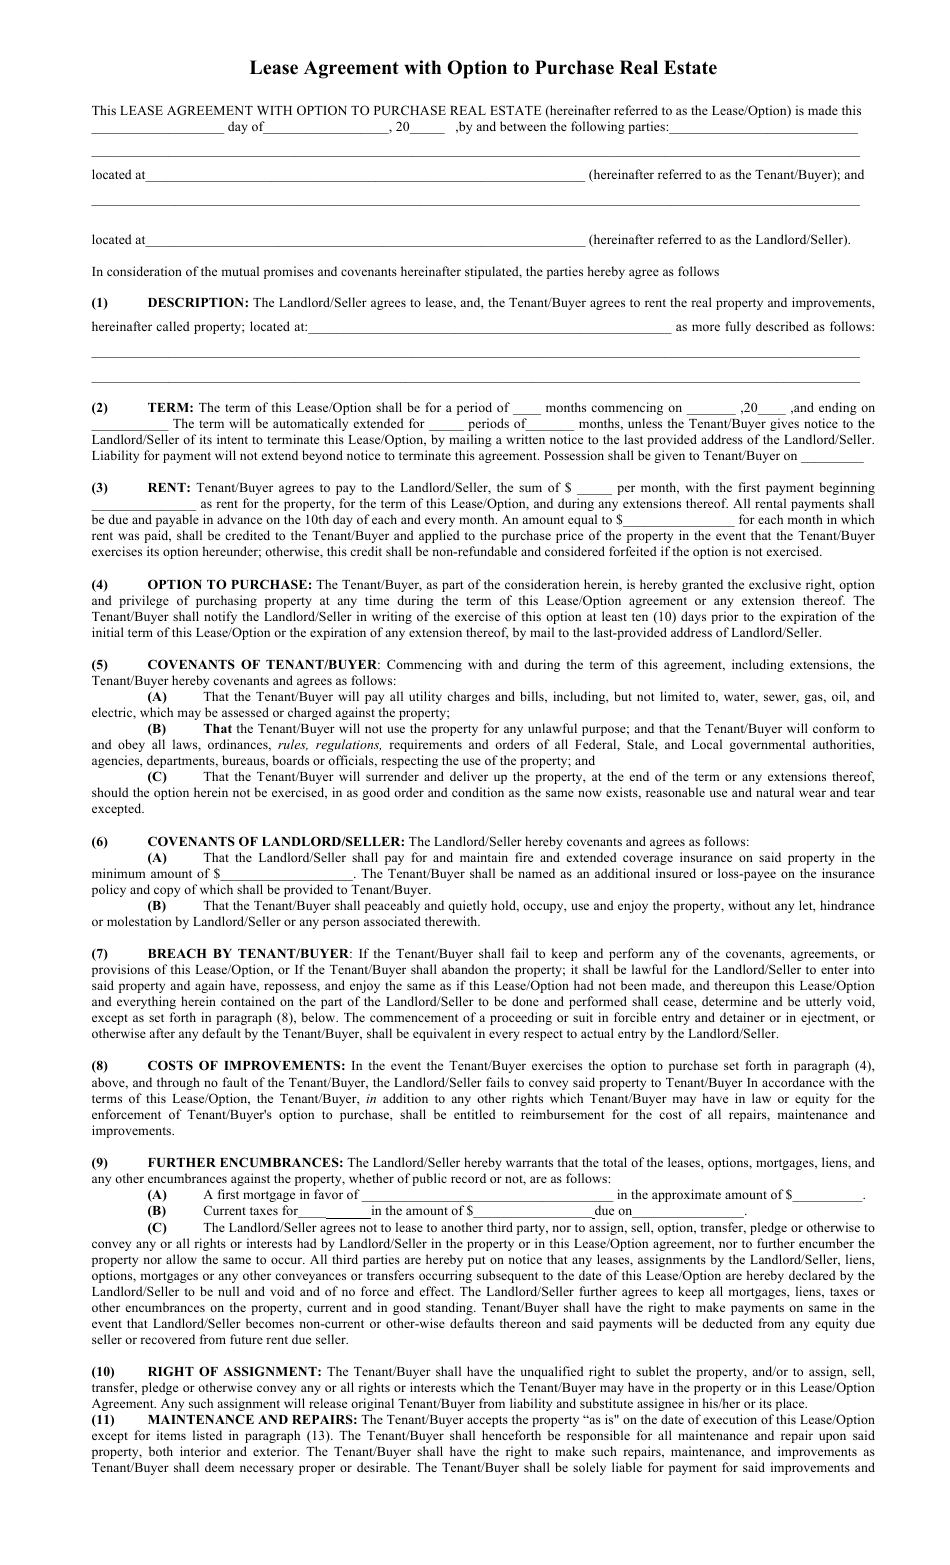 Lease Agreement With Option to Purchase Real Estate, Page 1